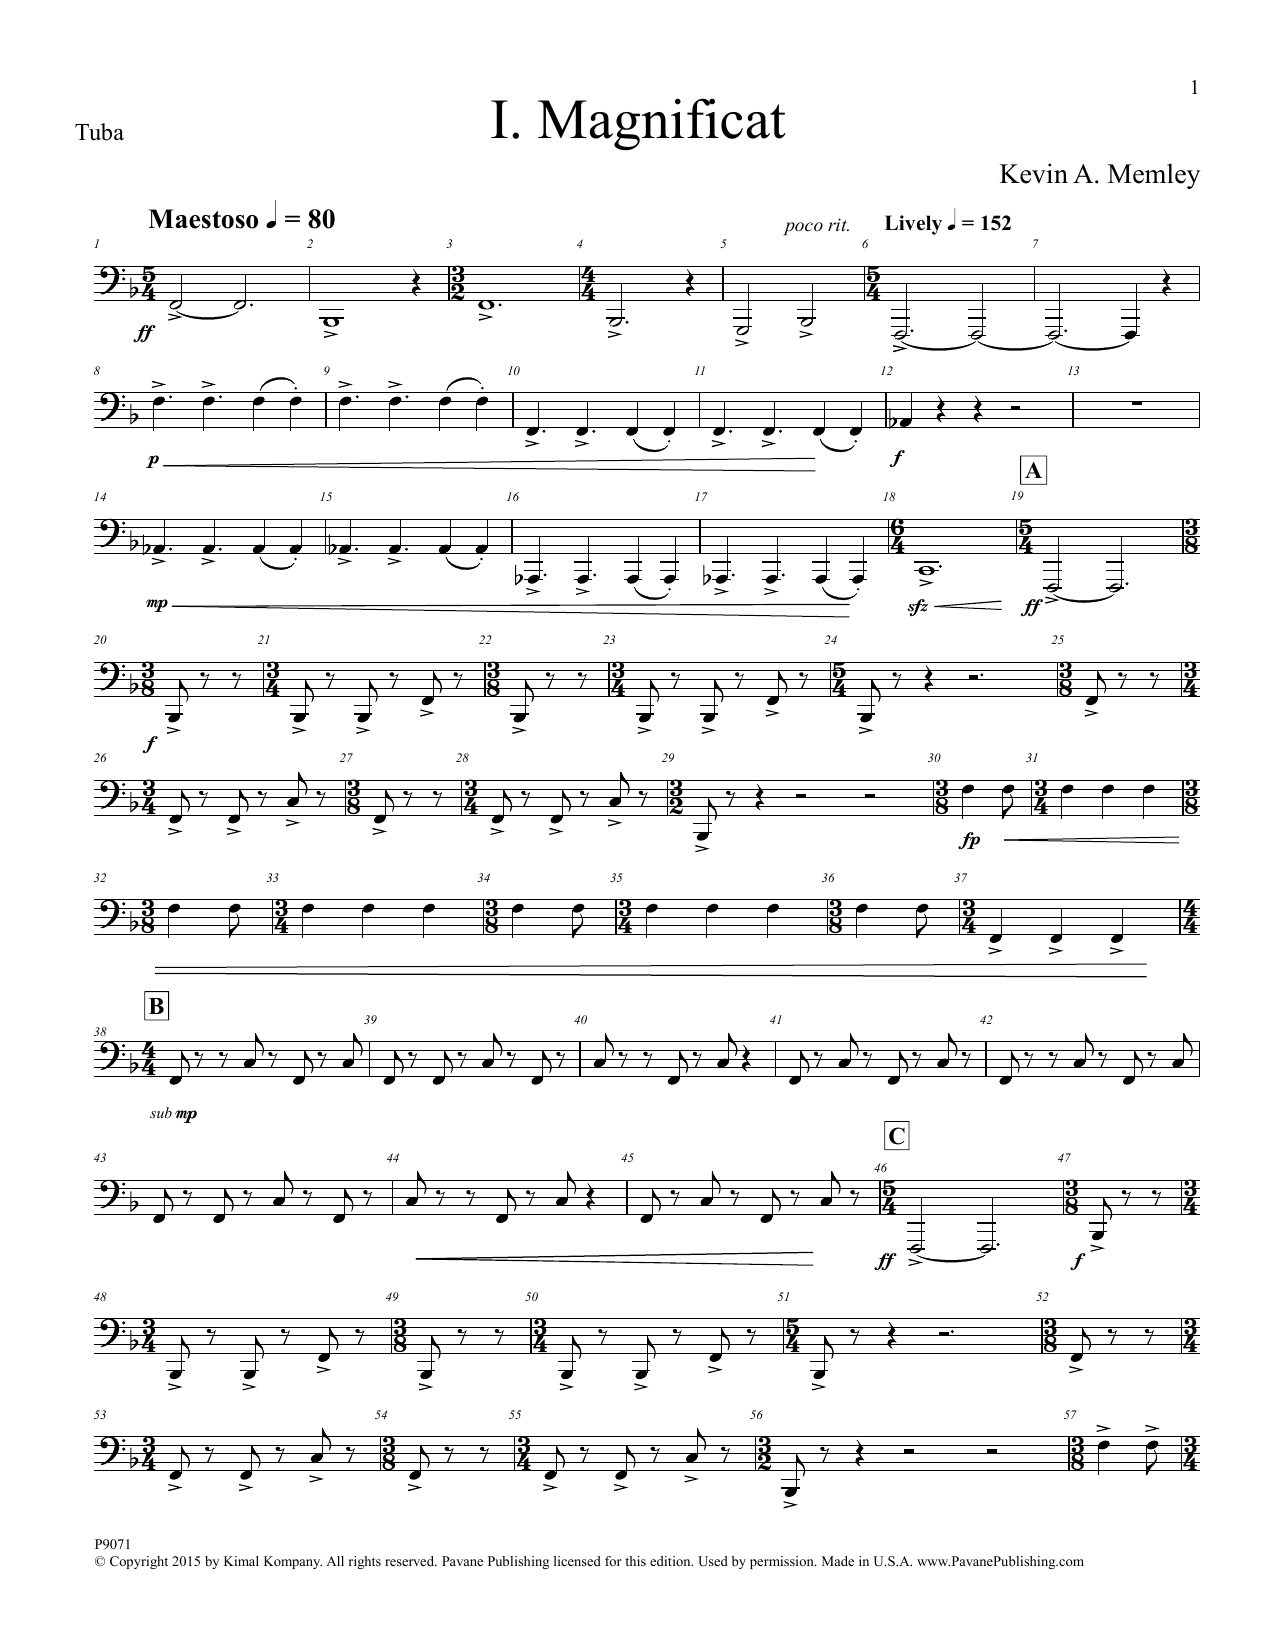 Download Kevin A. Memley Magnificat - Tuba Sheet Music